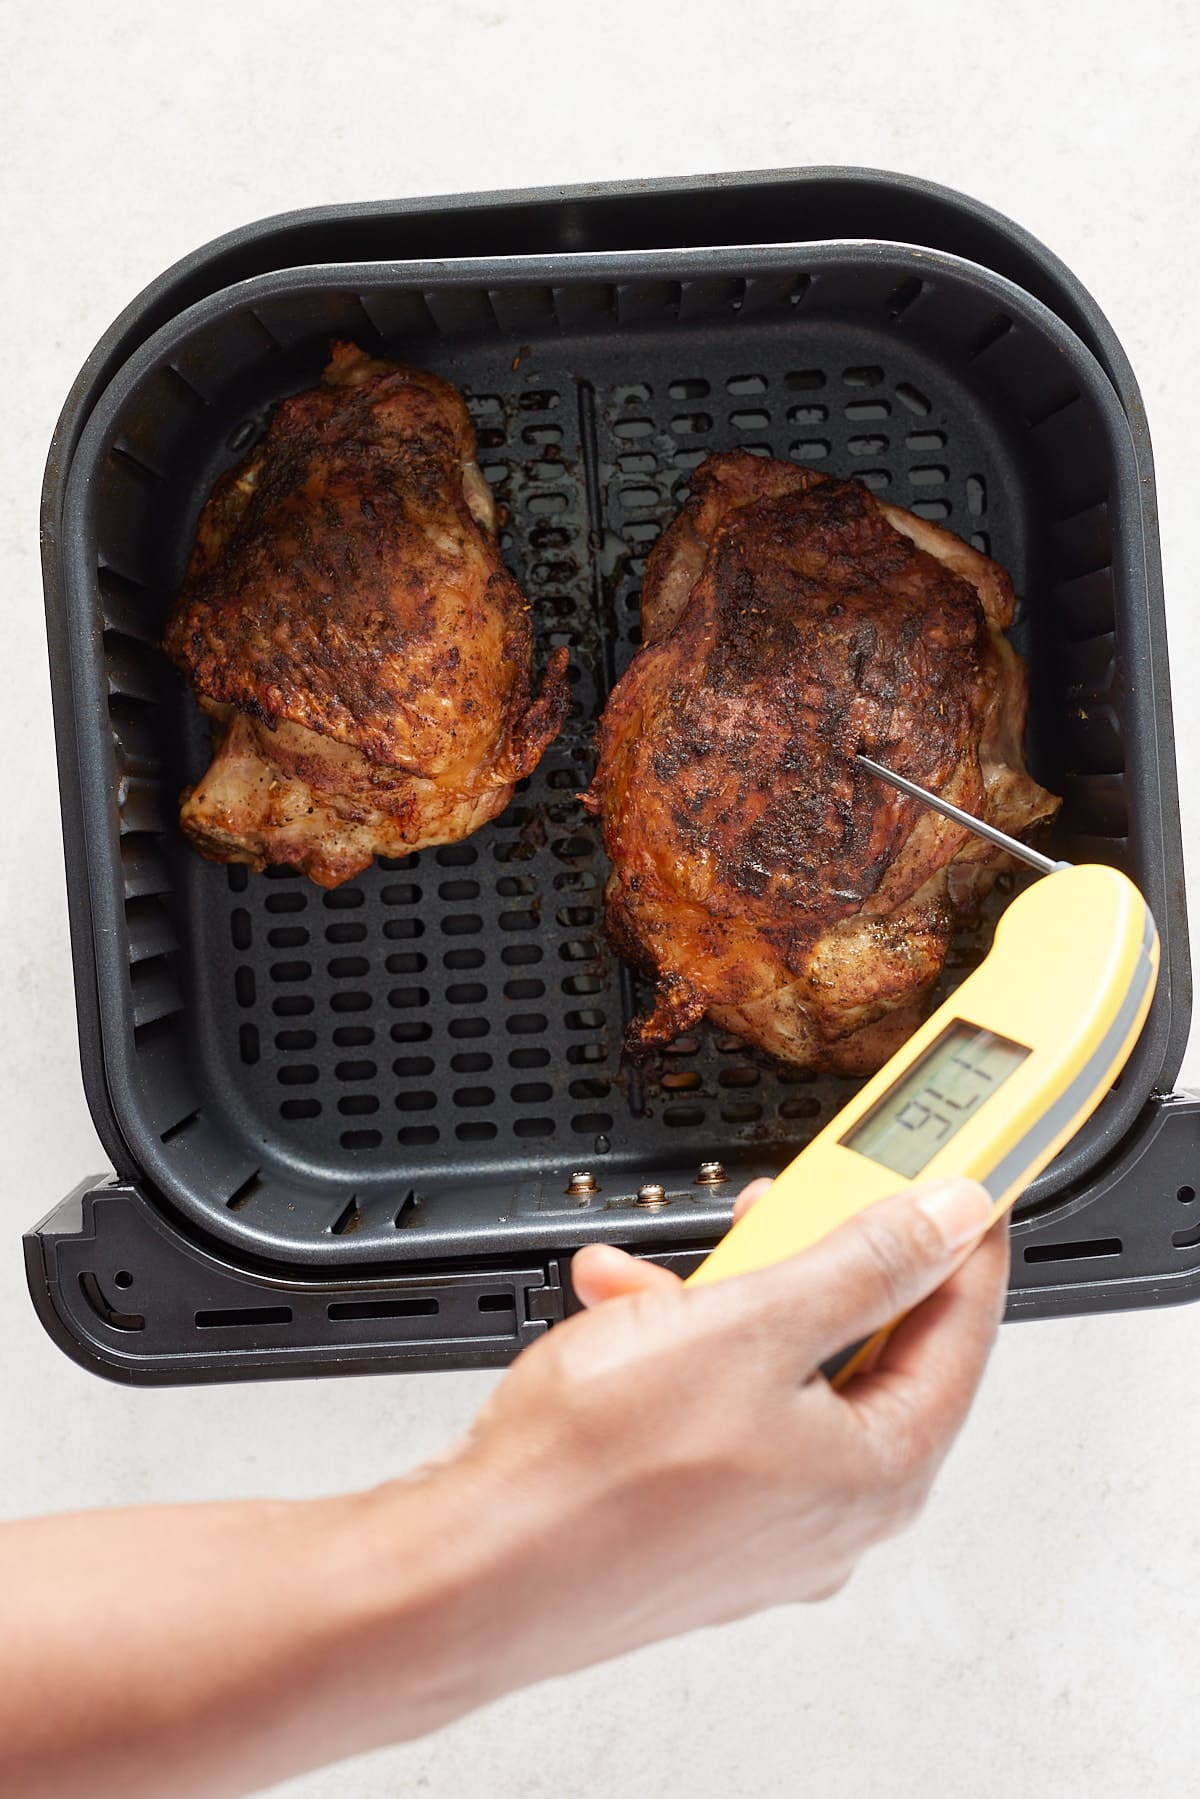 checking the temperature of the turkey thigh with a meat thermometer